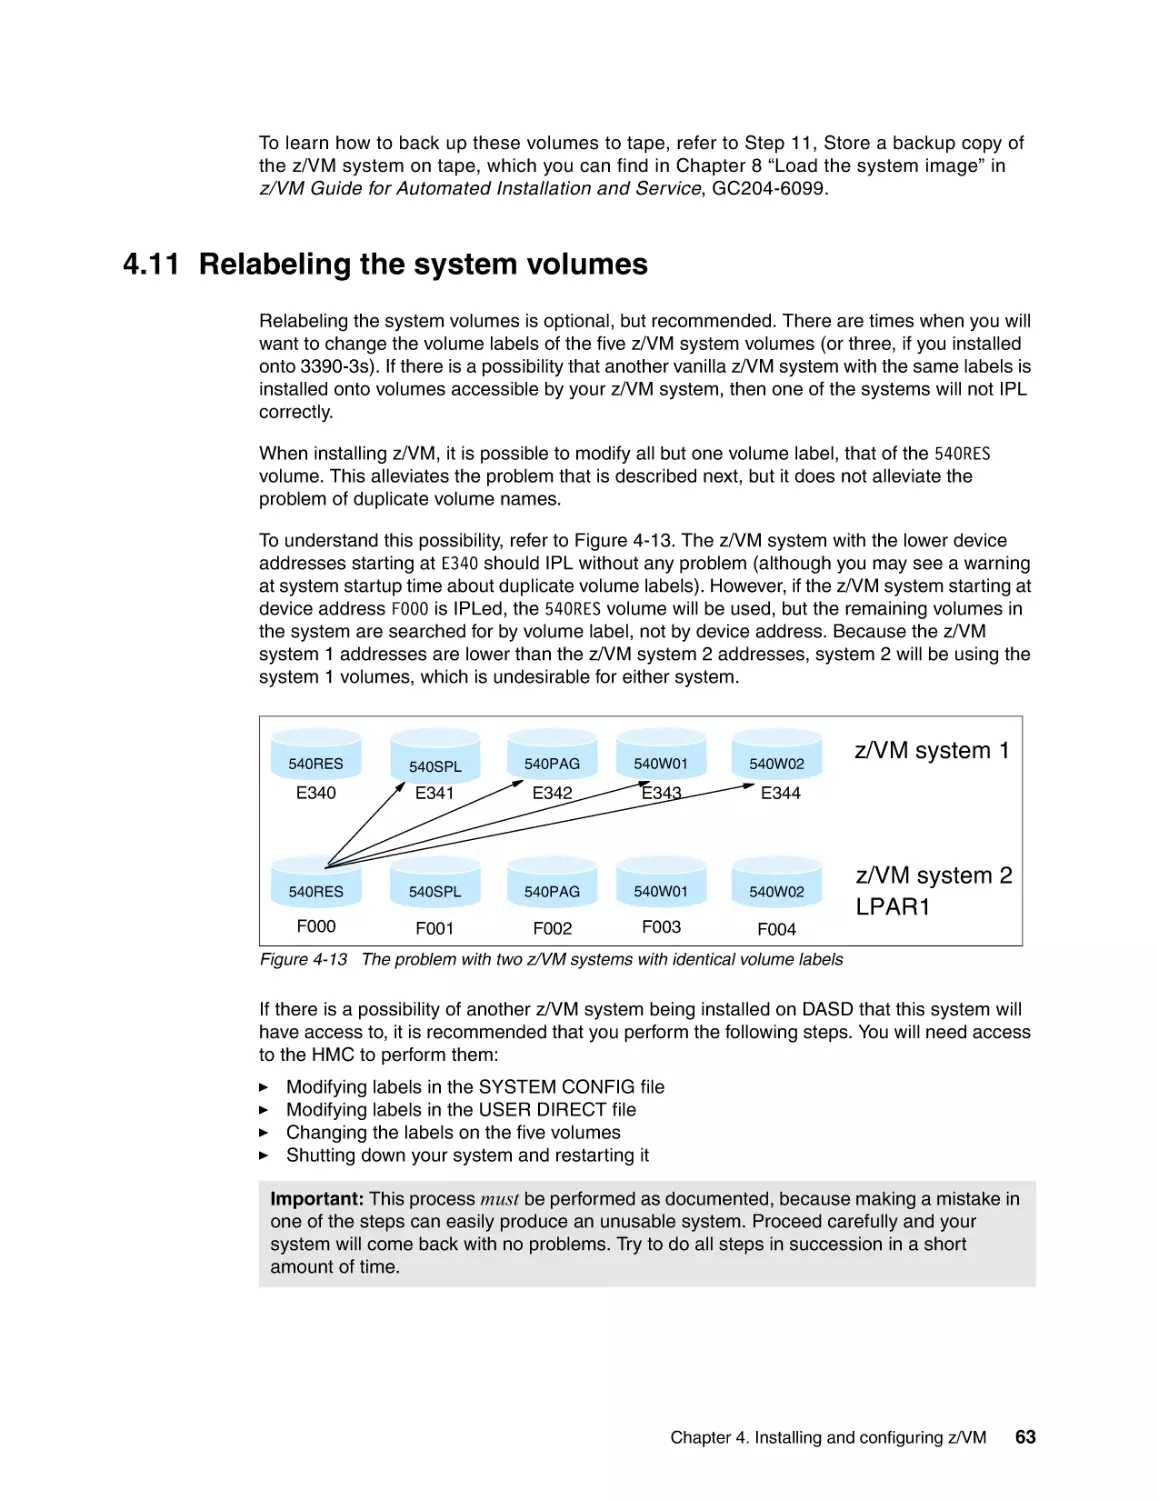 4.11 Relabeling the system volumes